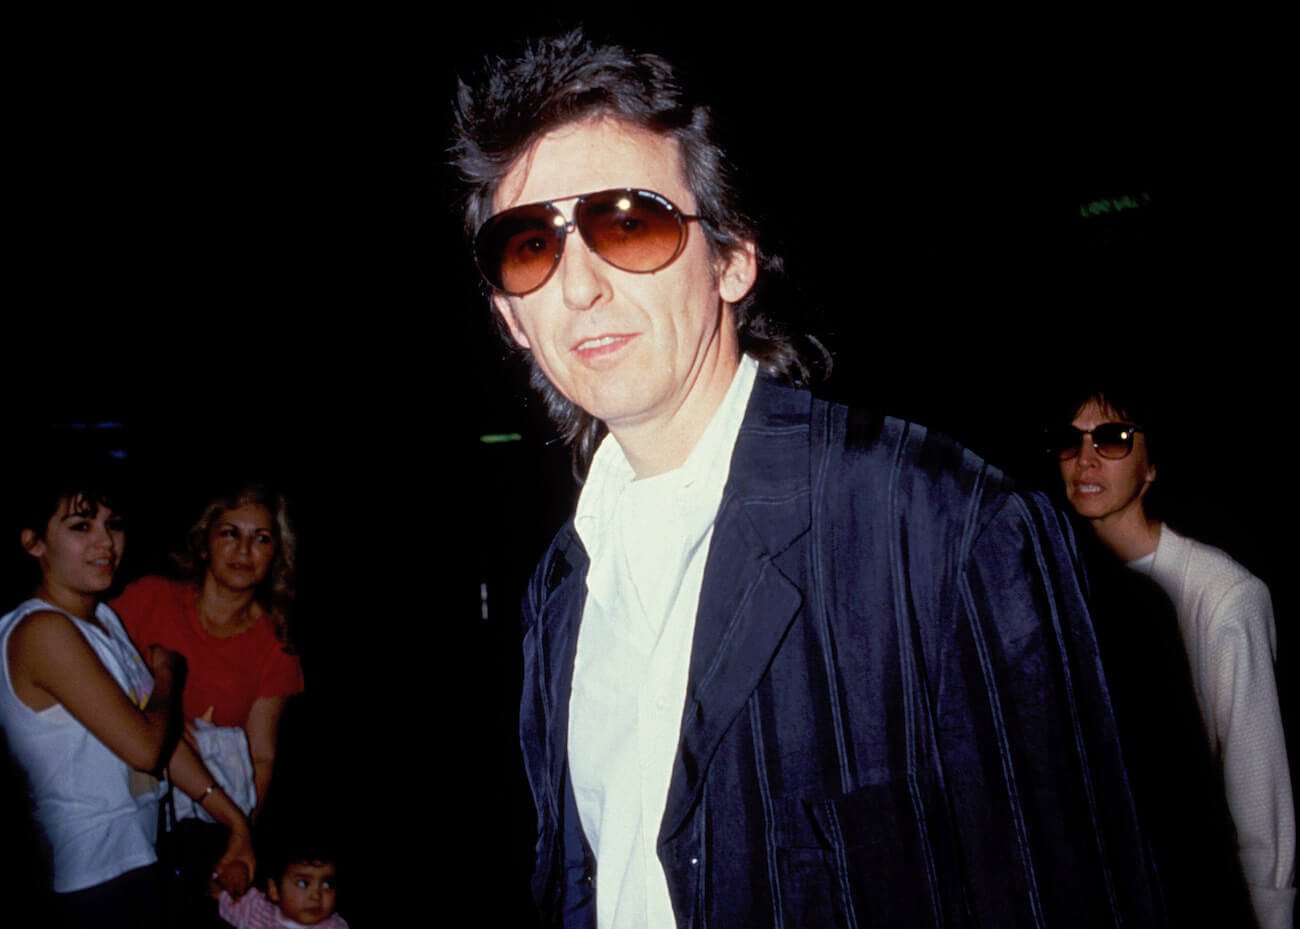 George Harrison in a black suit at LAX Airport in 1988.